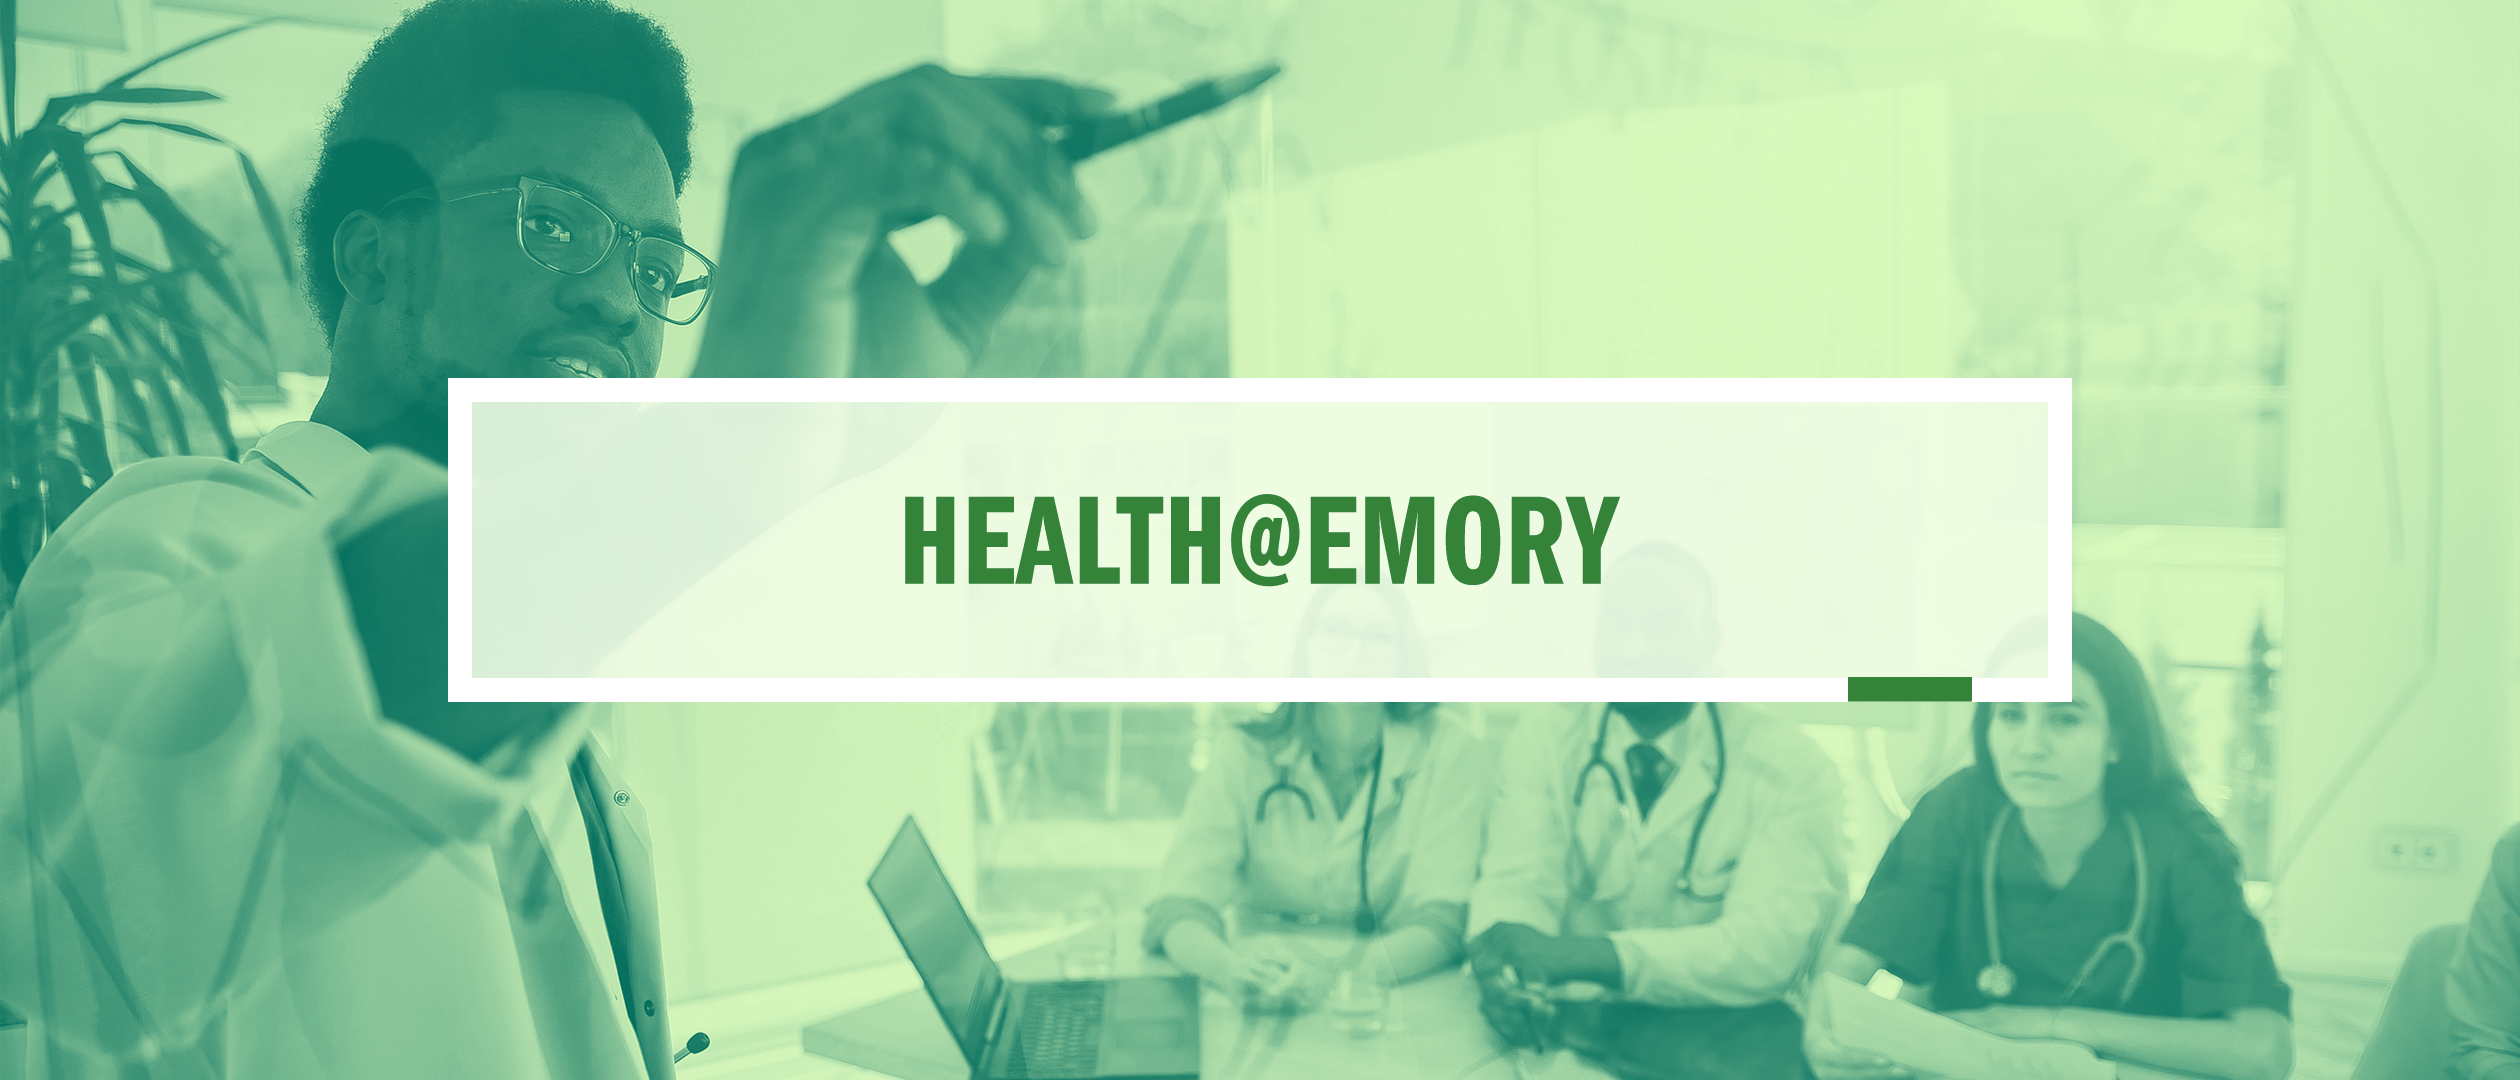 A pale-green image of a meeting in which an African American man at left is gesturing with a pencil to an audience of male and female health care workers of several ethnicities. Surmounted by a semi-opaque white box containing the words "Health @Emory"